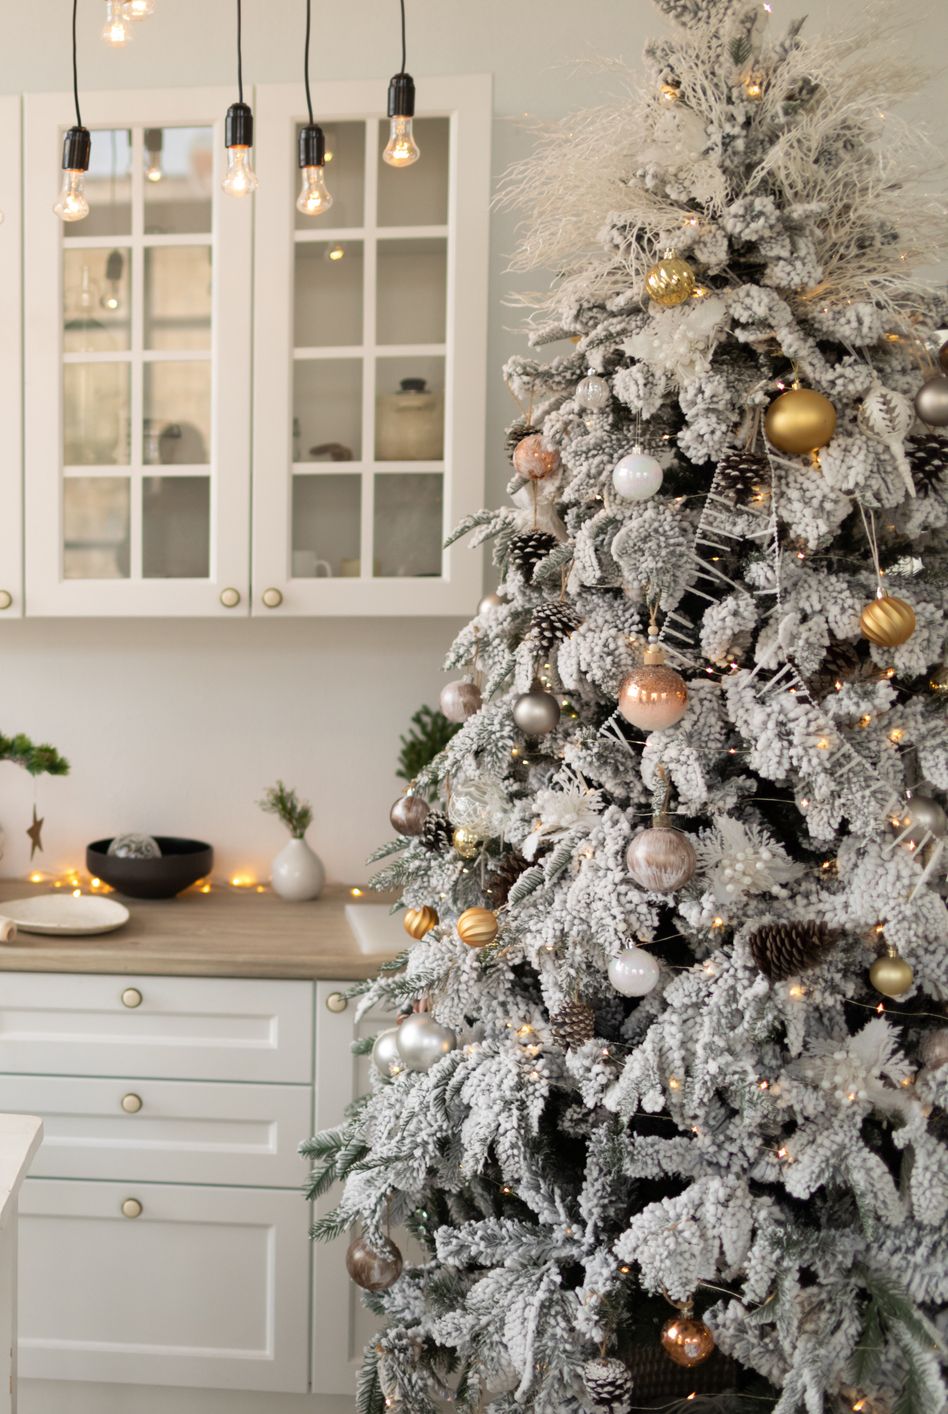 interior white kitchen with christmas decor and decorated fir tree